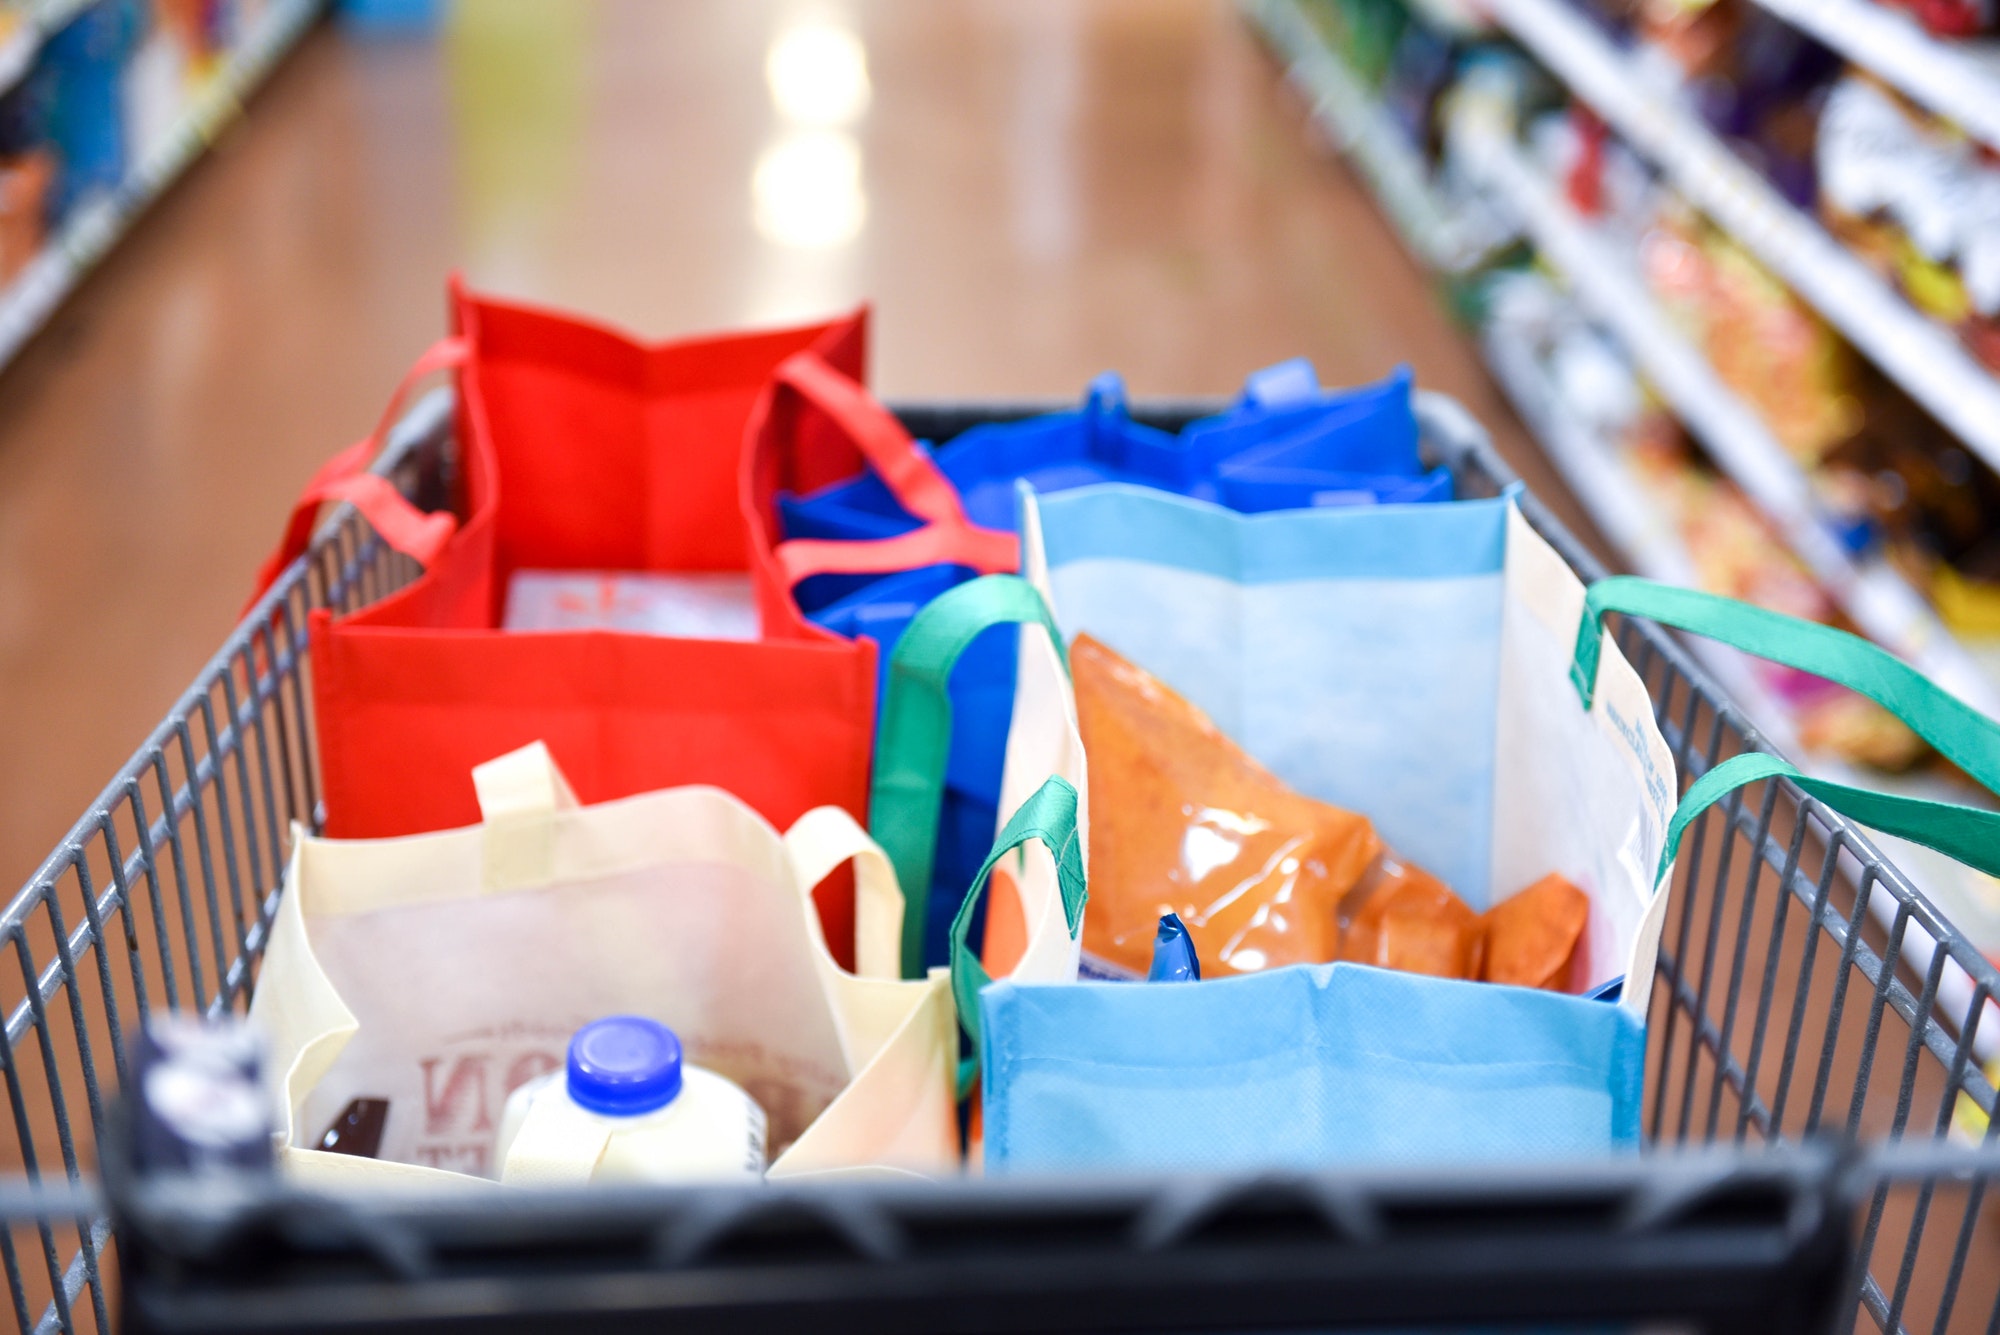 Close-up image of a shopping cart in the middle of a grocery store isle filled with reusable